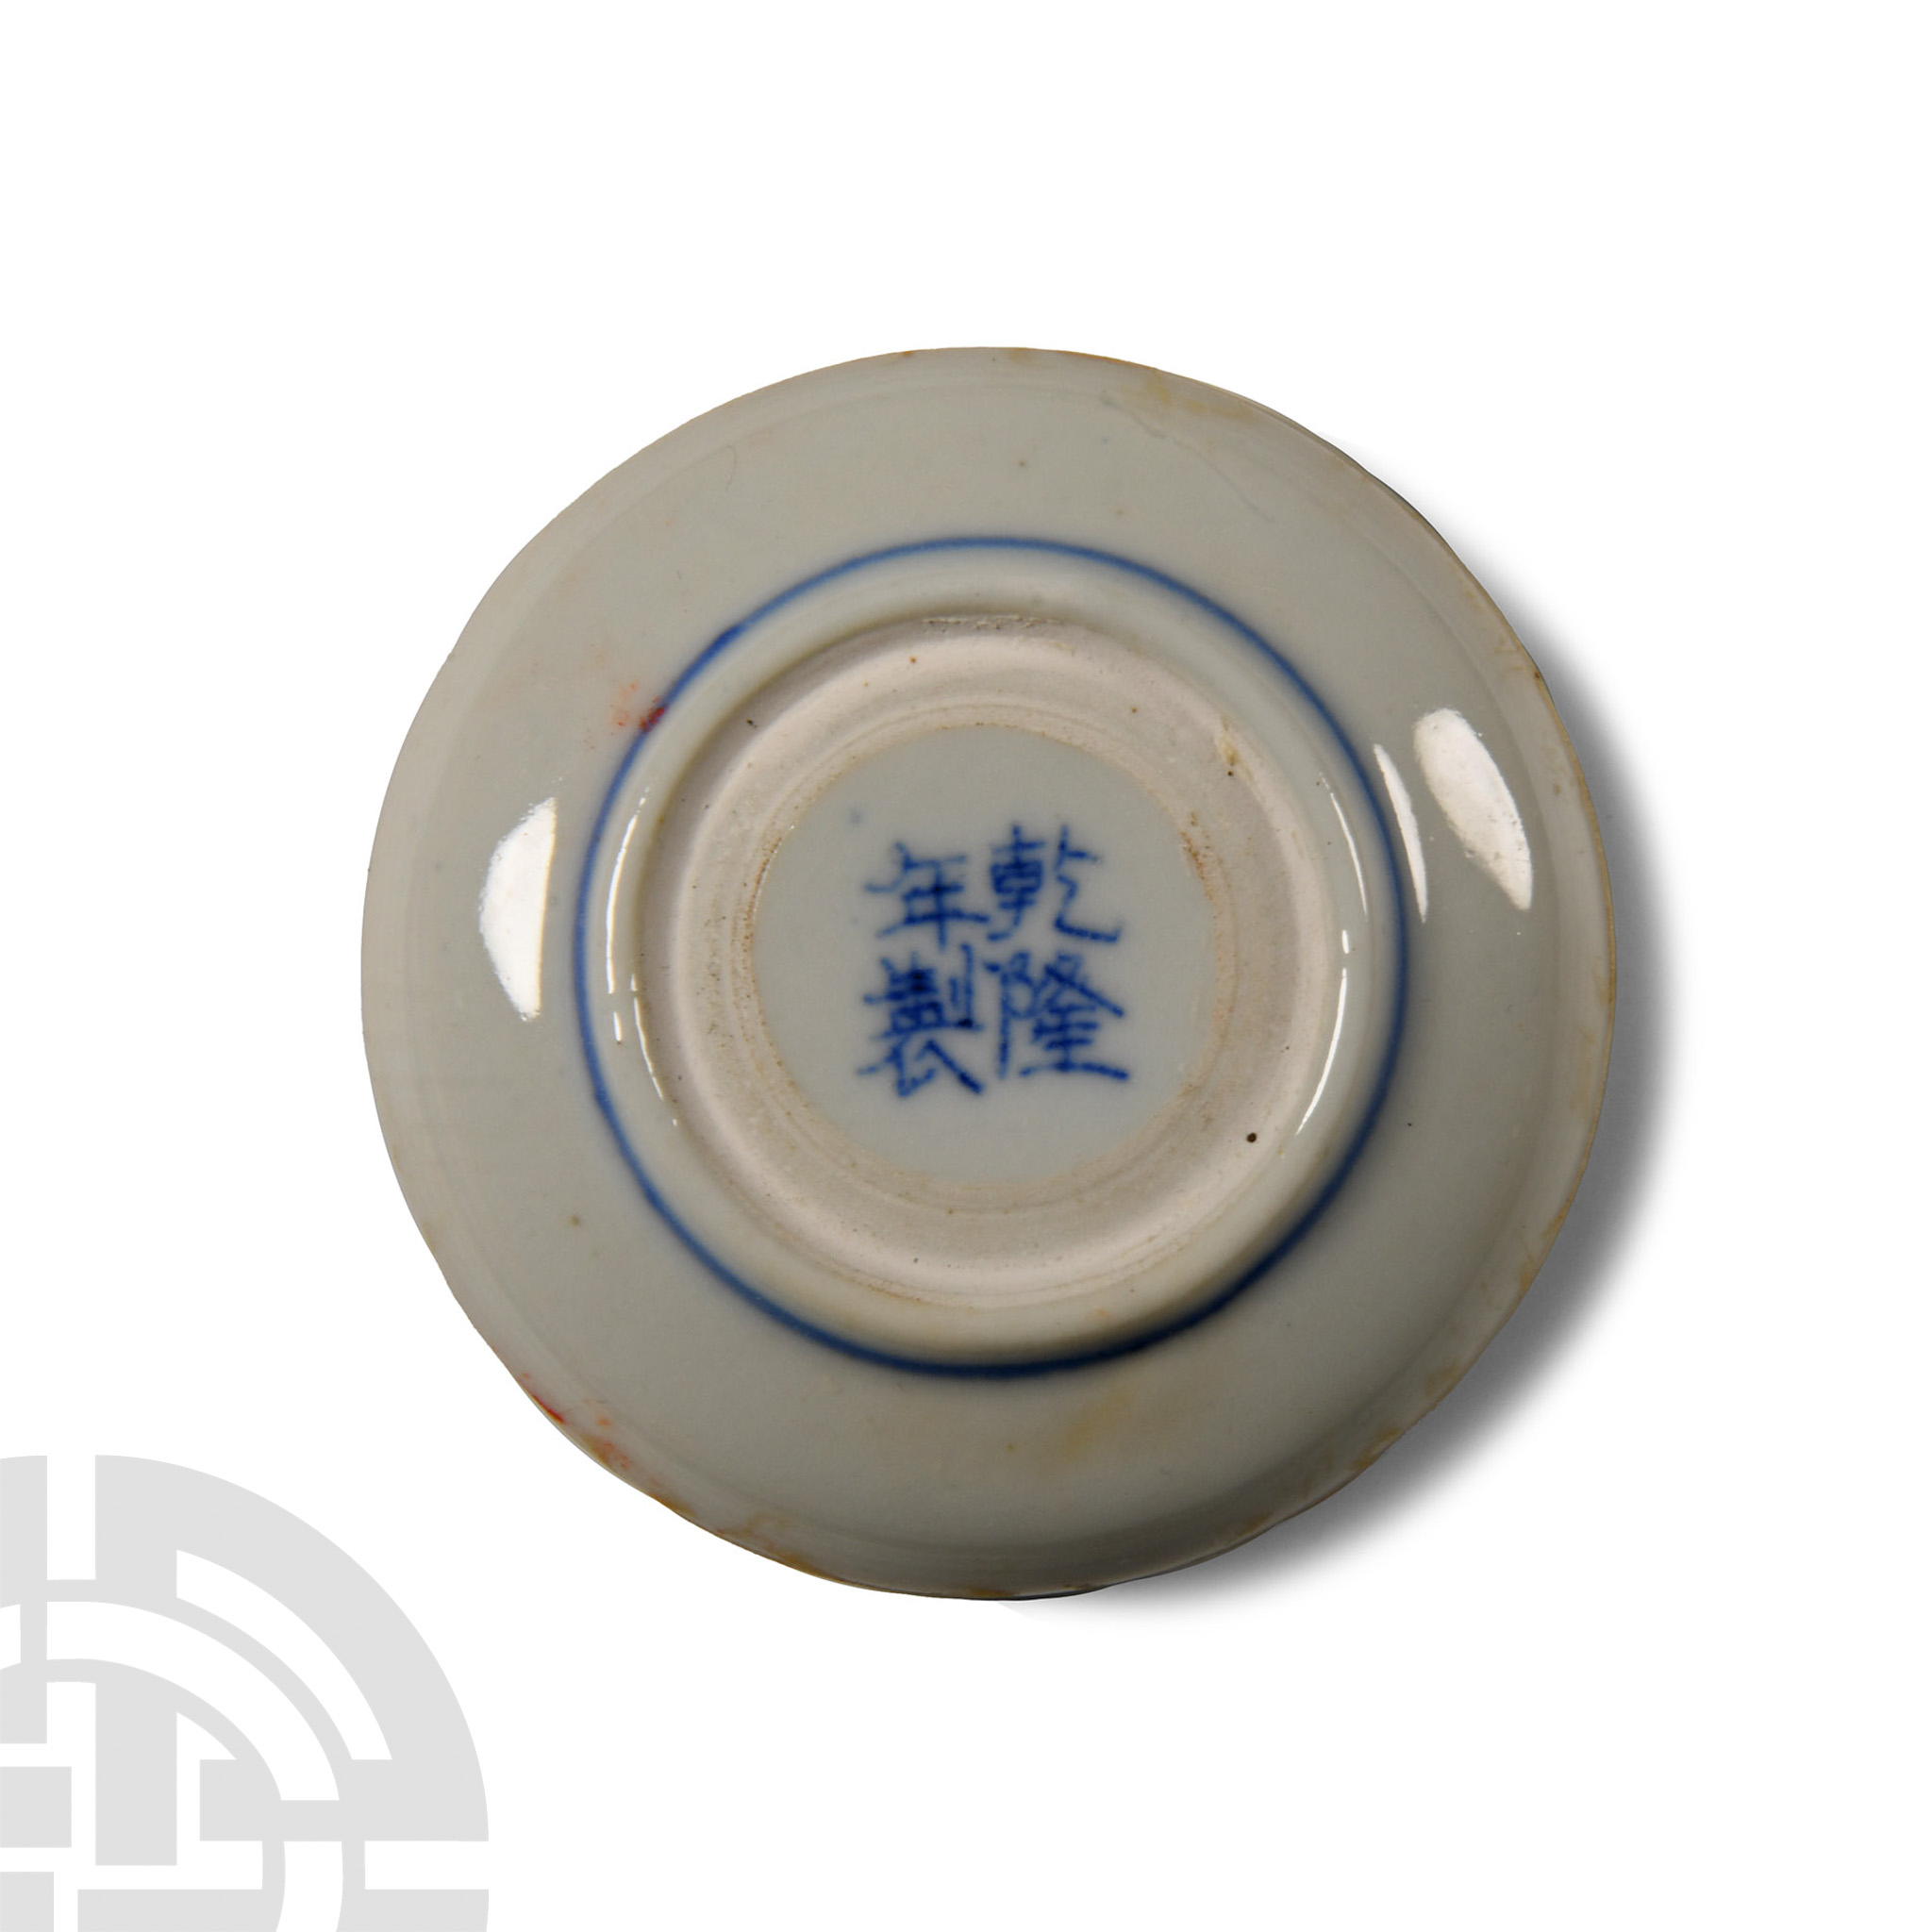 Chinese Porcelain Two-Part Pigment Reservoir - Image 3 of 3